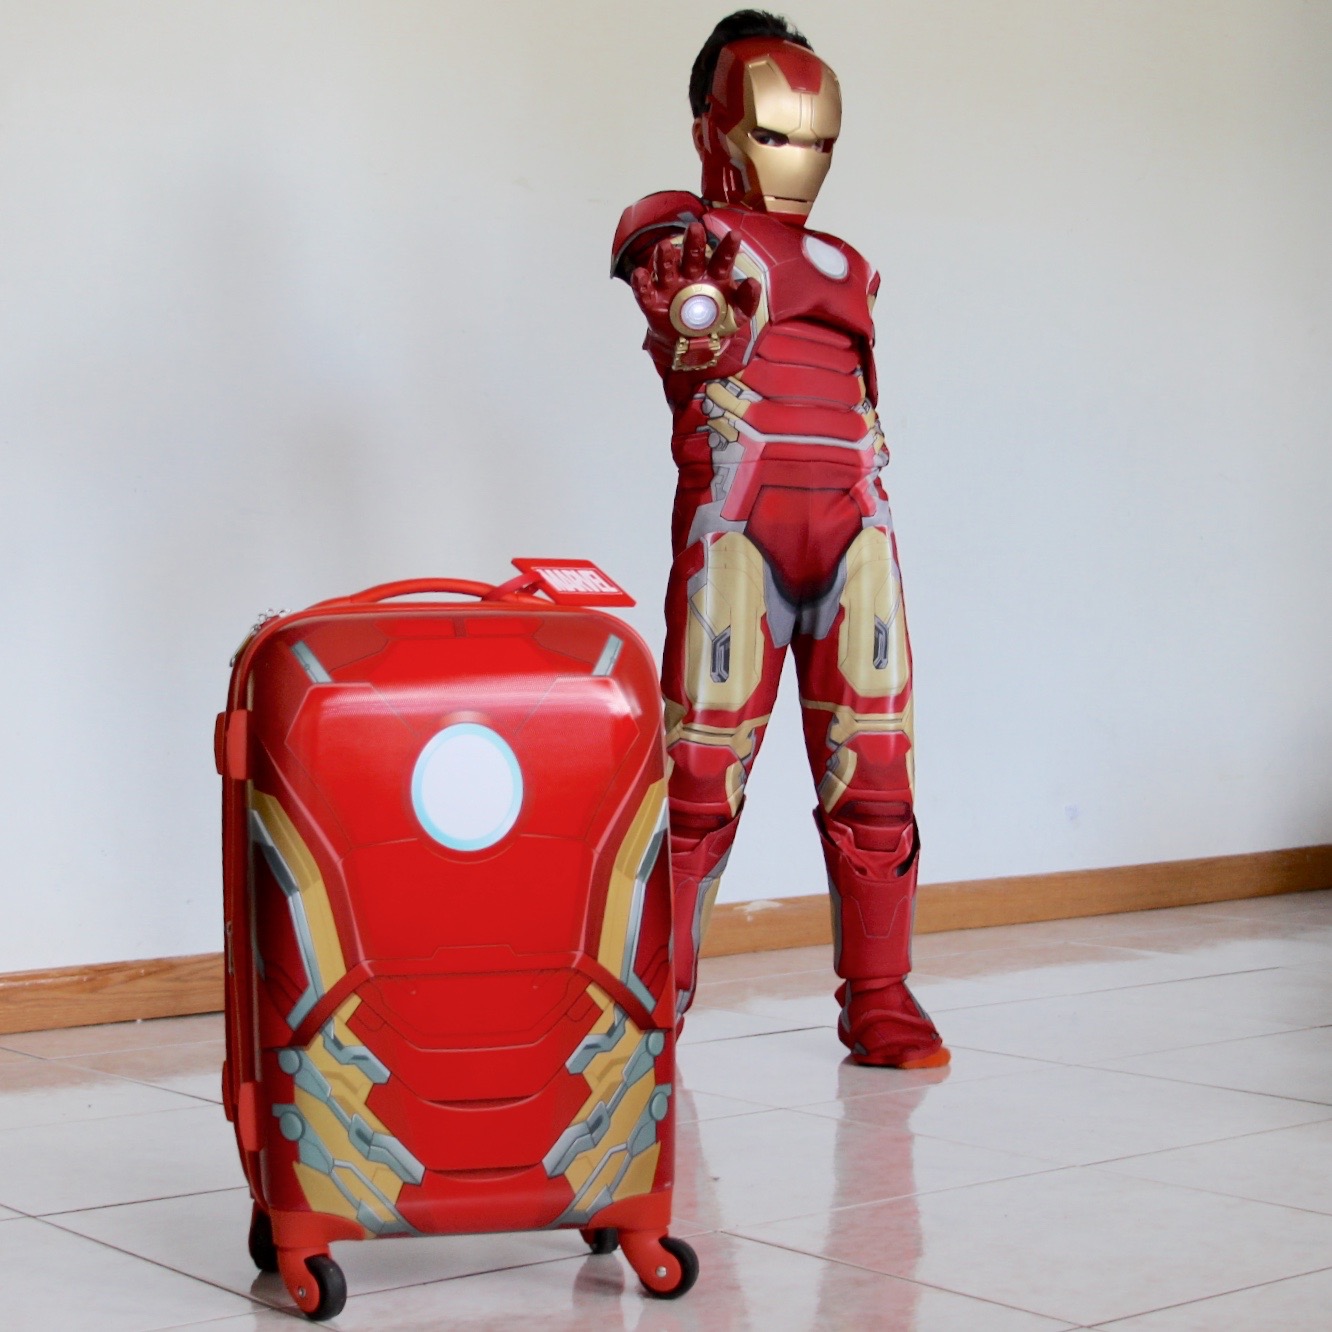 Iron man luggage from American Tourister